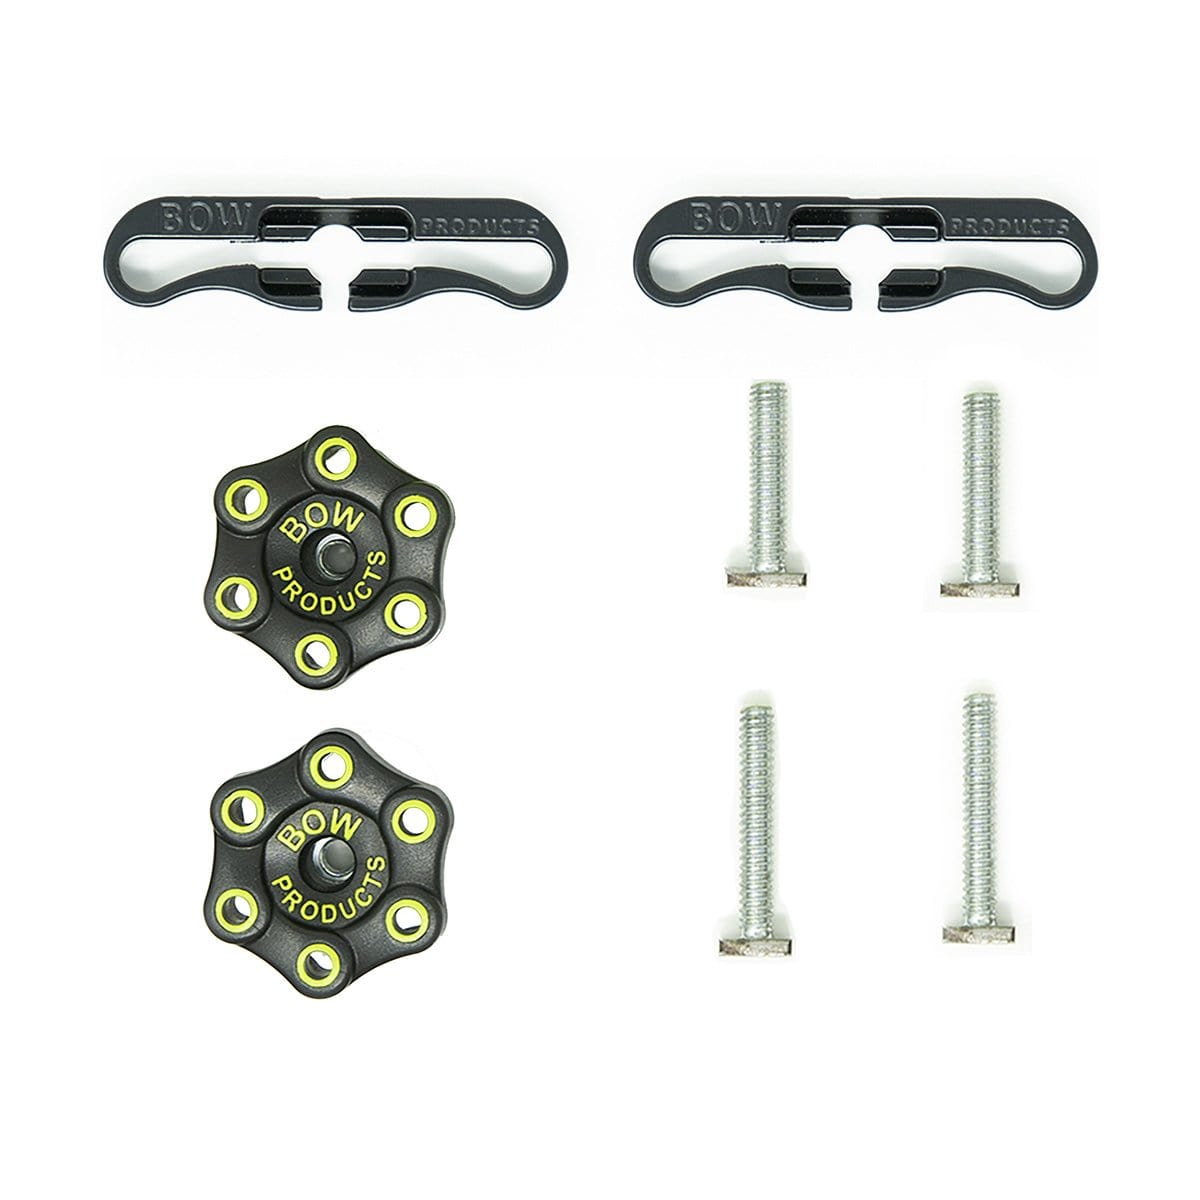 Bow Products AP2 Jigs and Fixtures AnchorPRO Short 3/4” Miter Bar Kit